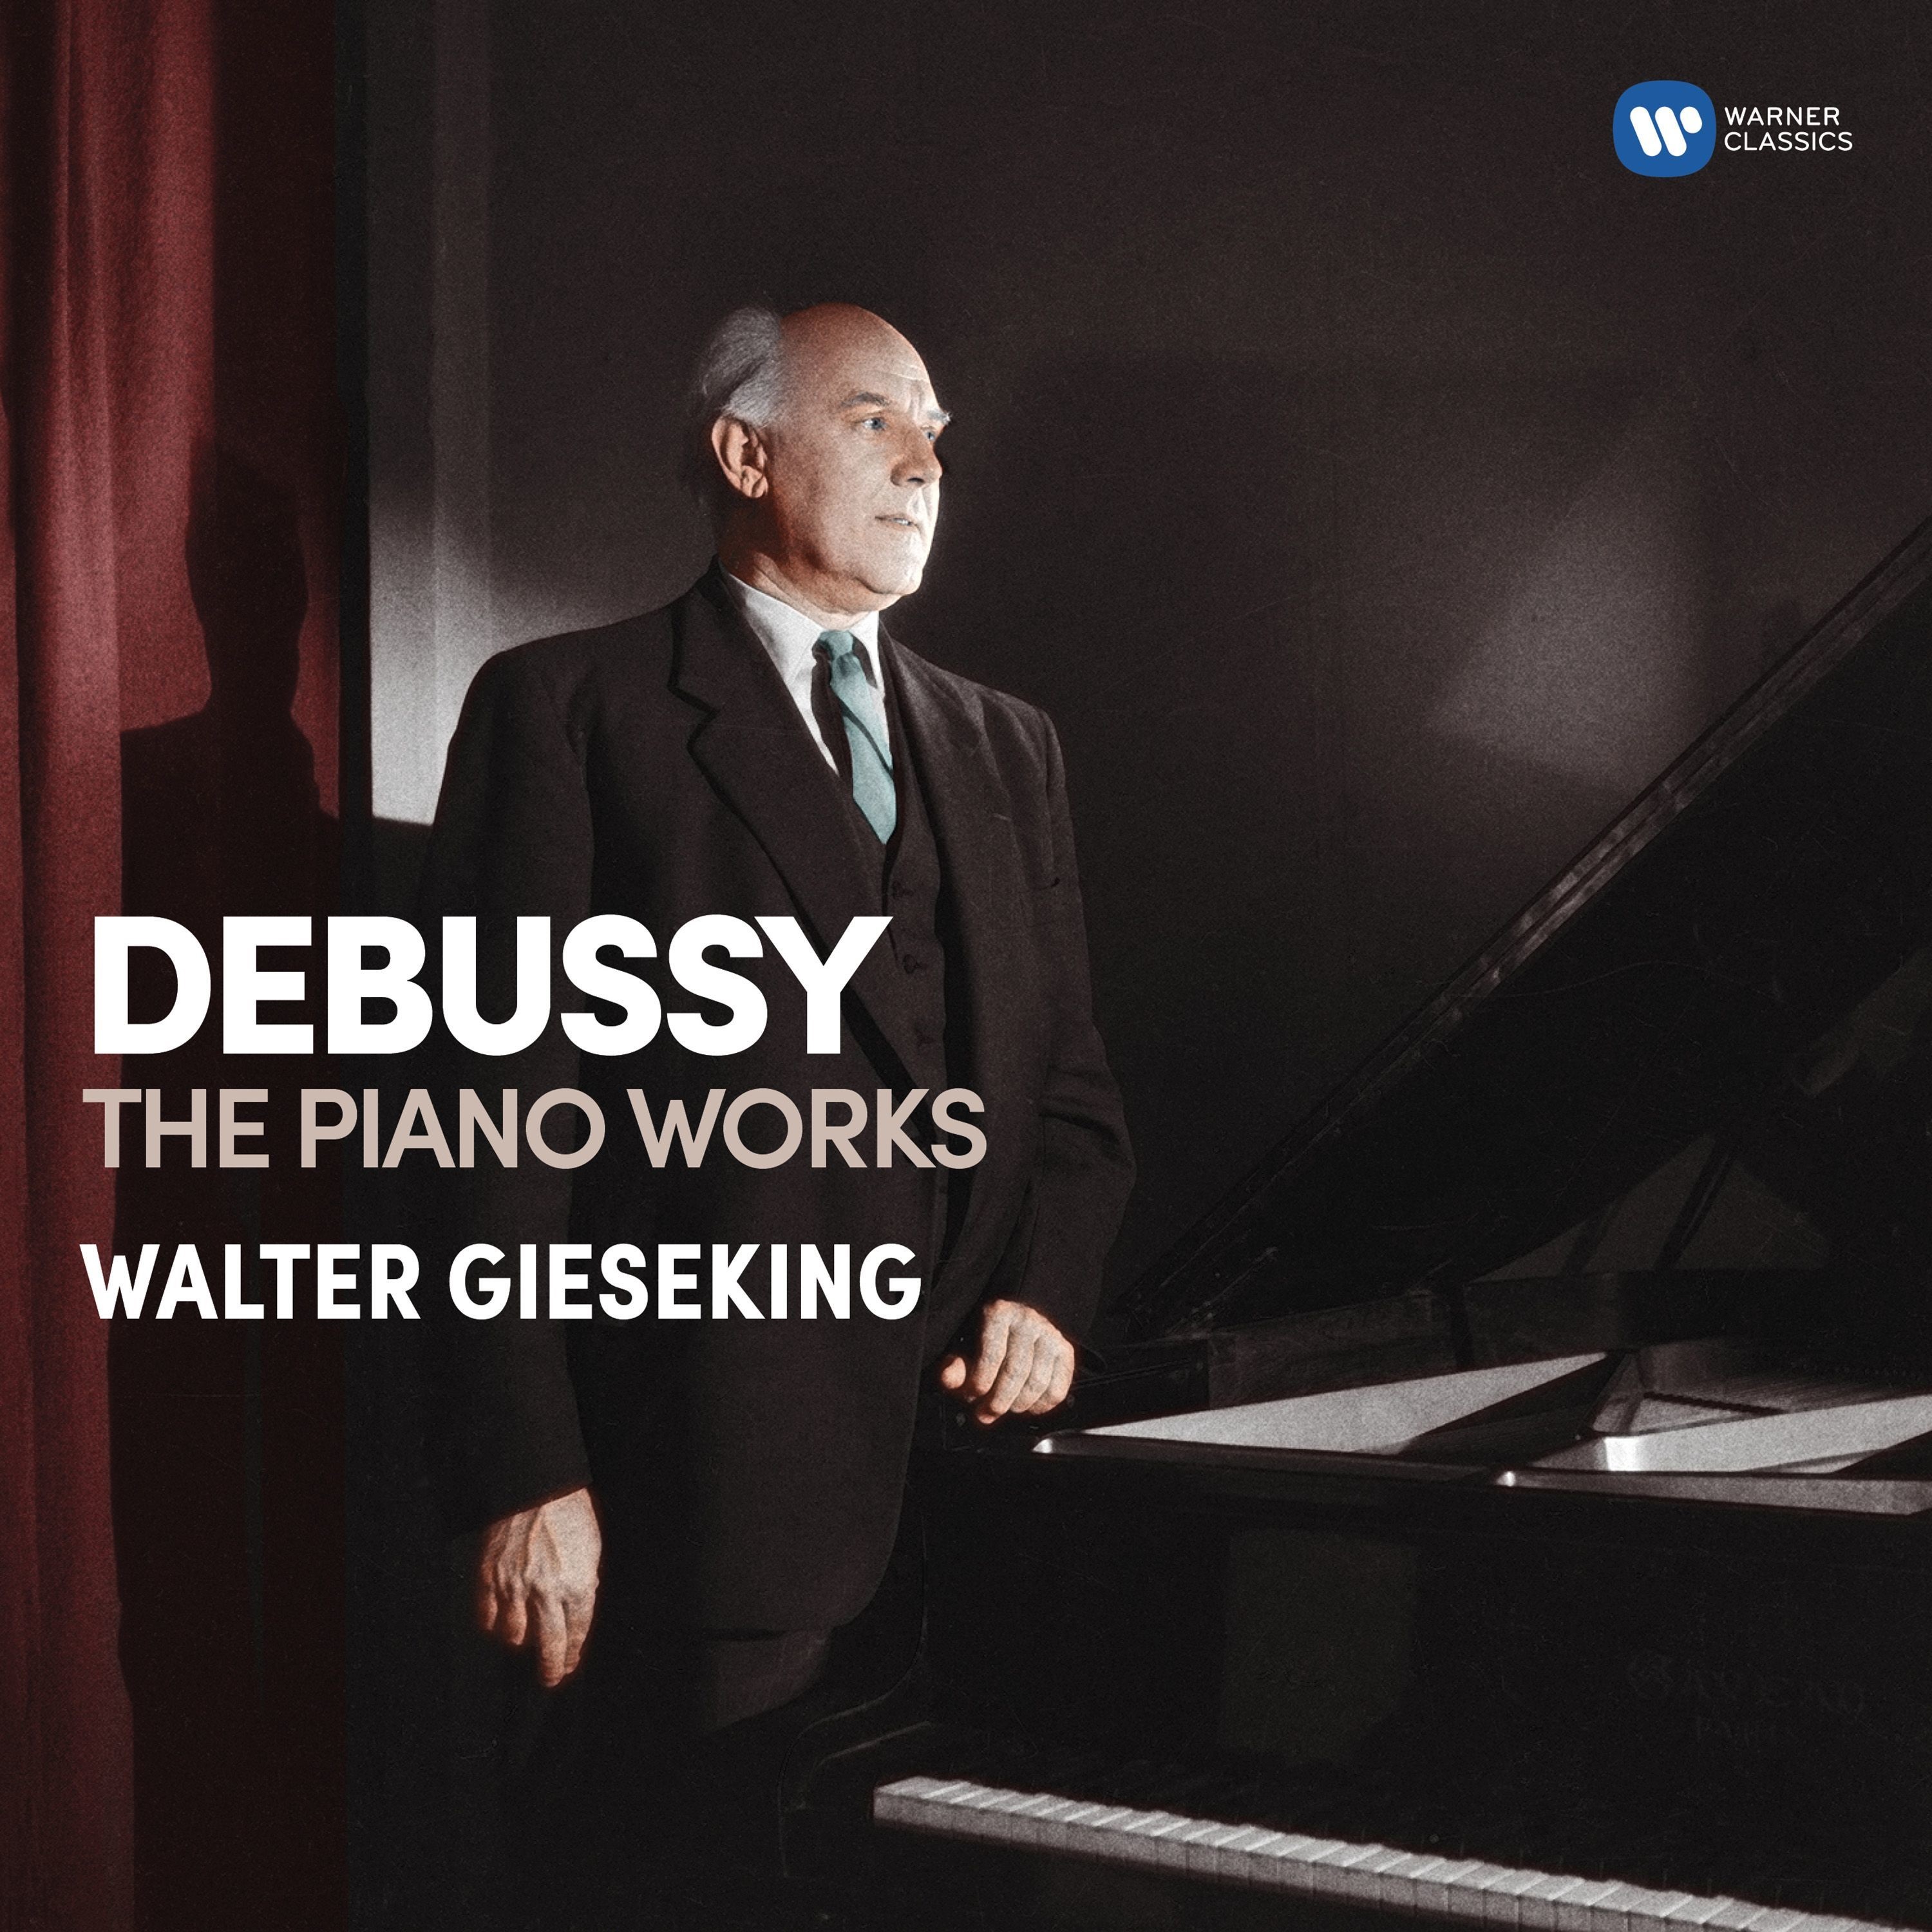 Walter Gieseking - Debussy: The Piano Works (2017) [FLAC 24bit/96kHz]